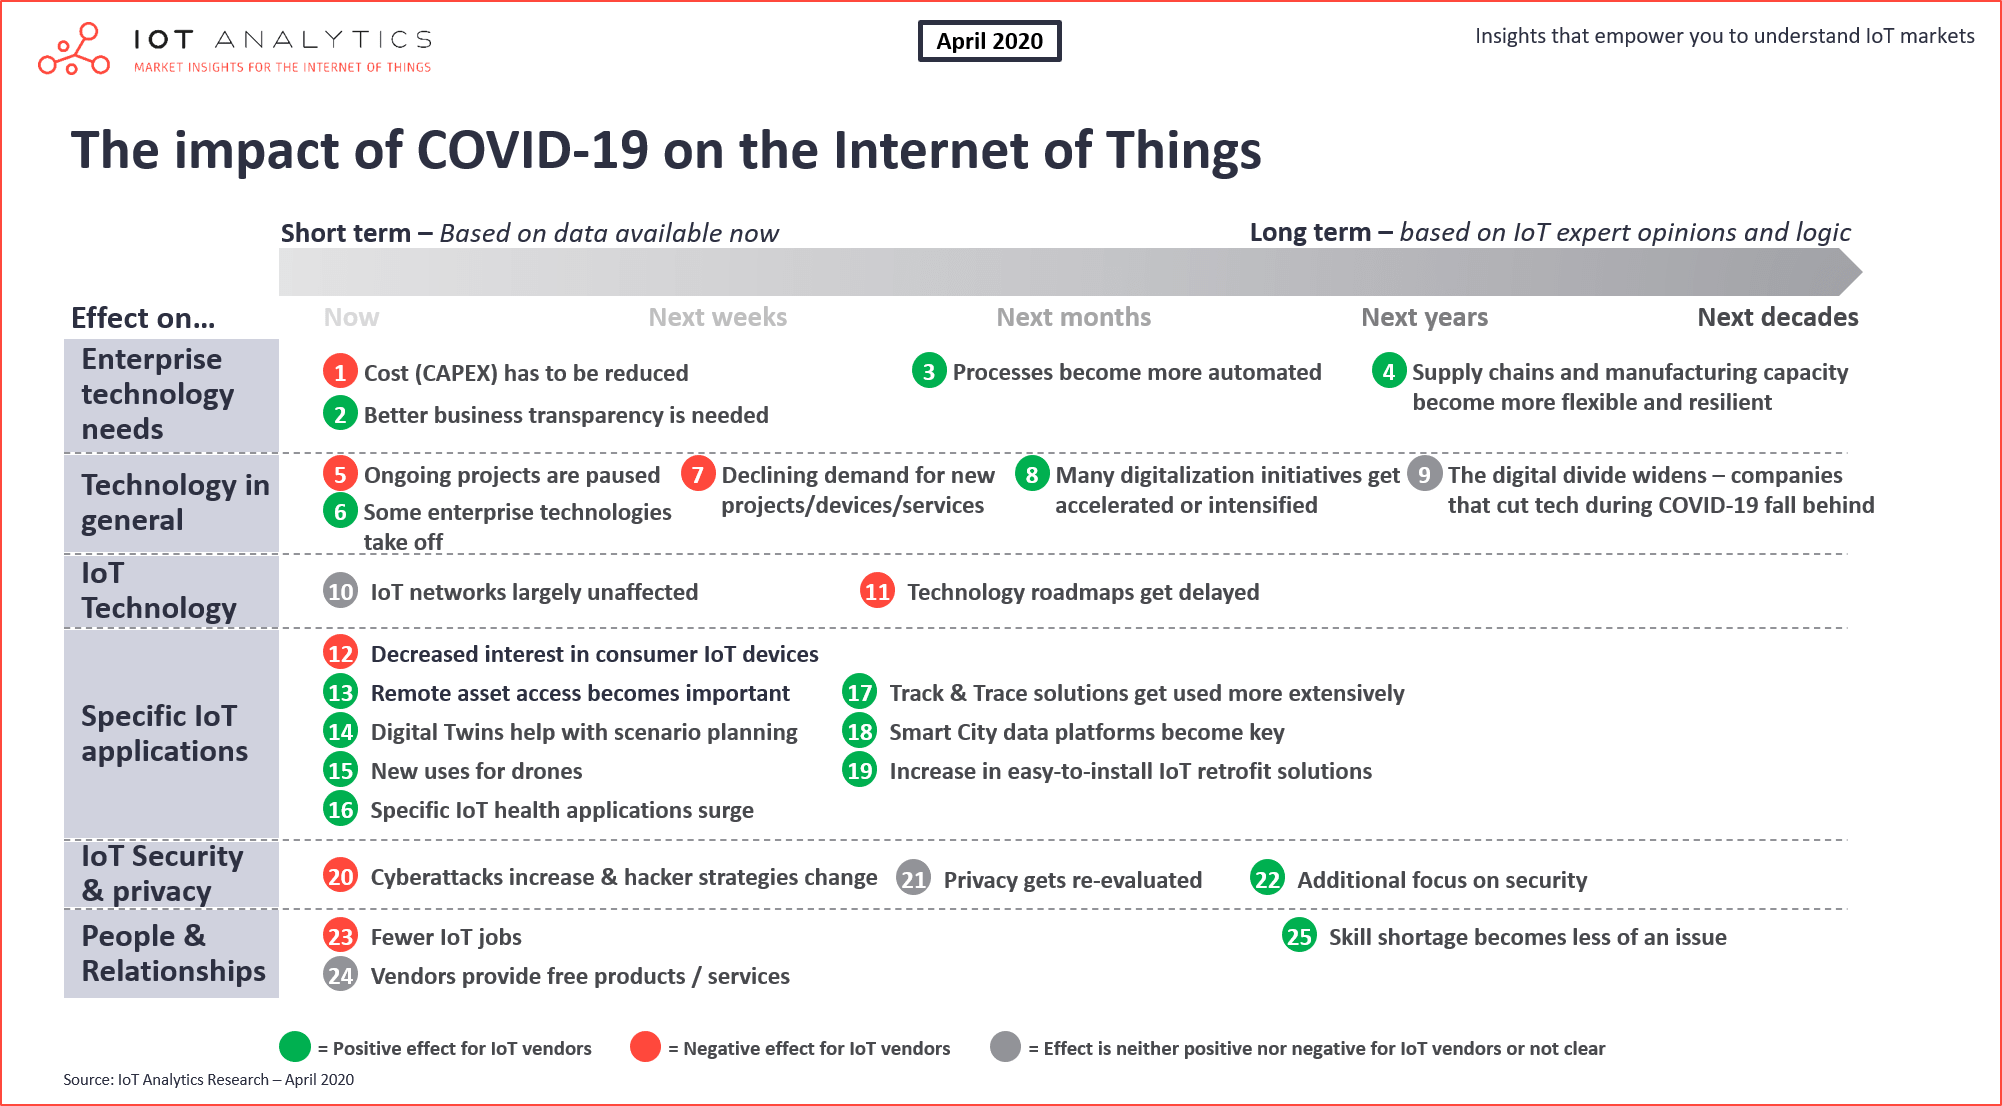 The impact of Covid-19 on the Internet of Things - Complete view